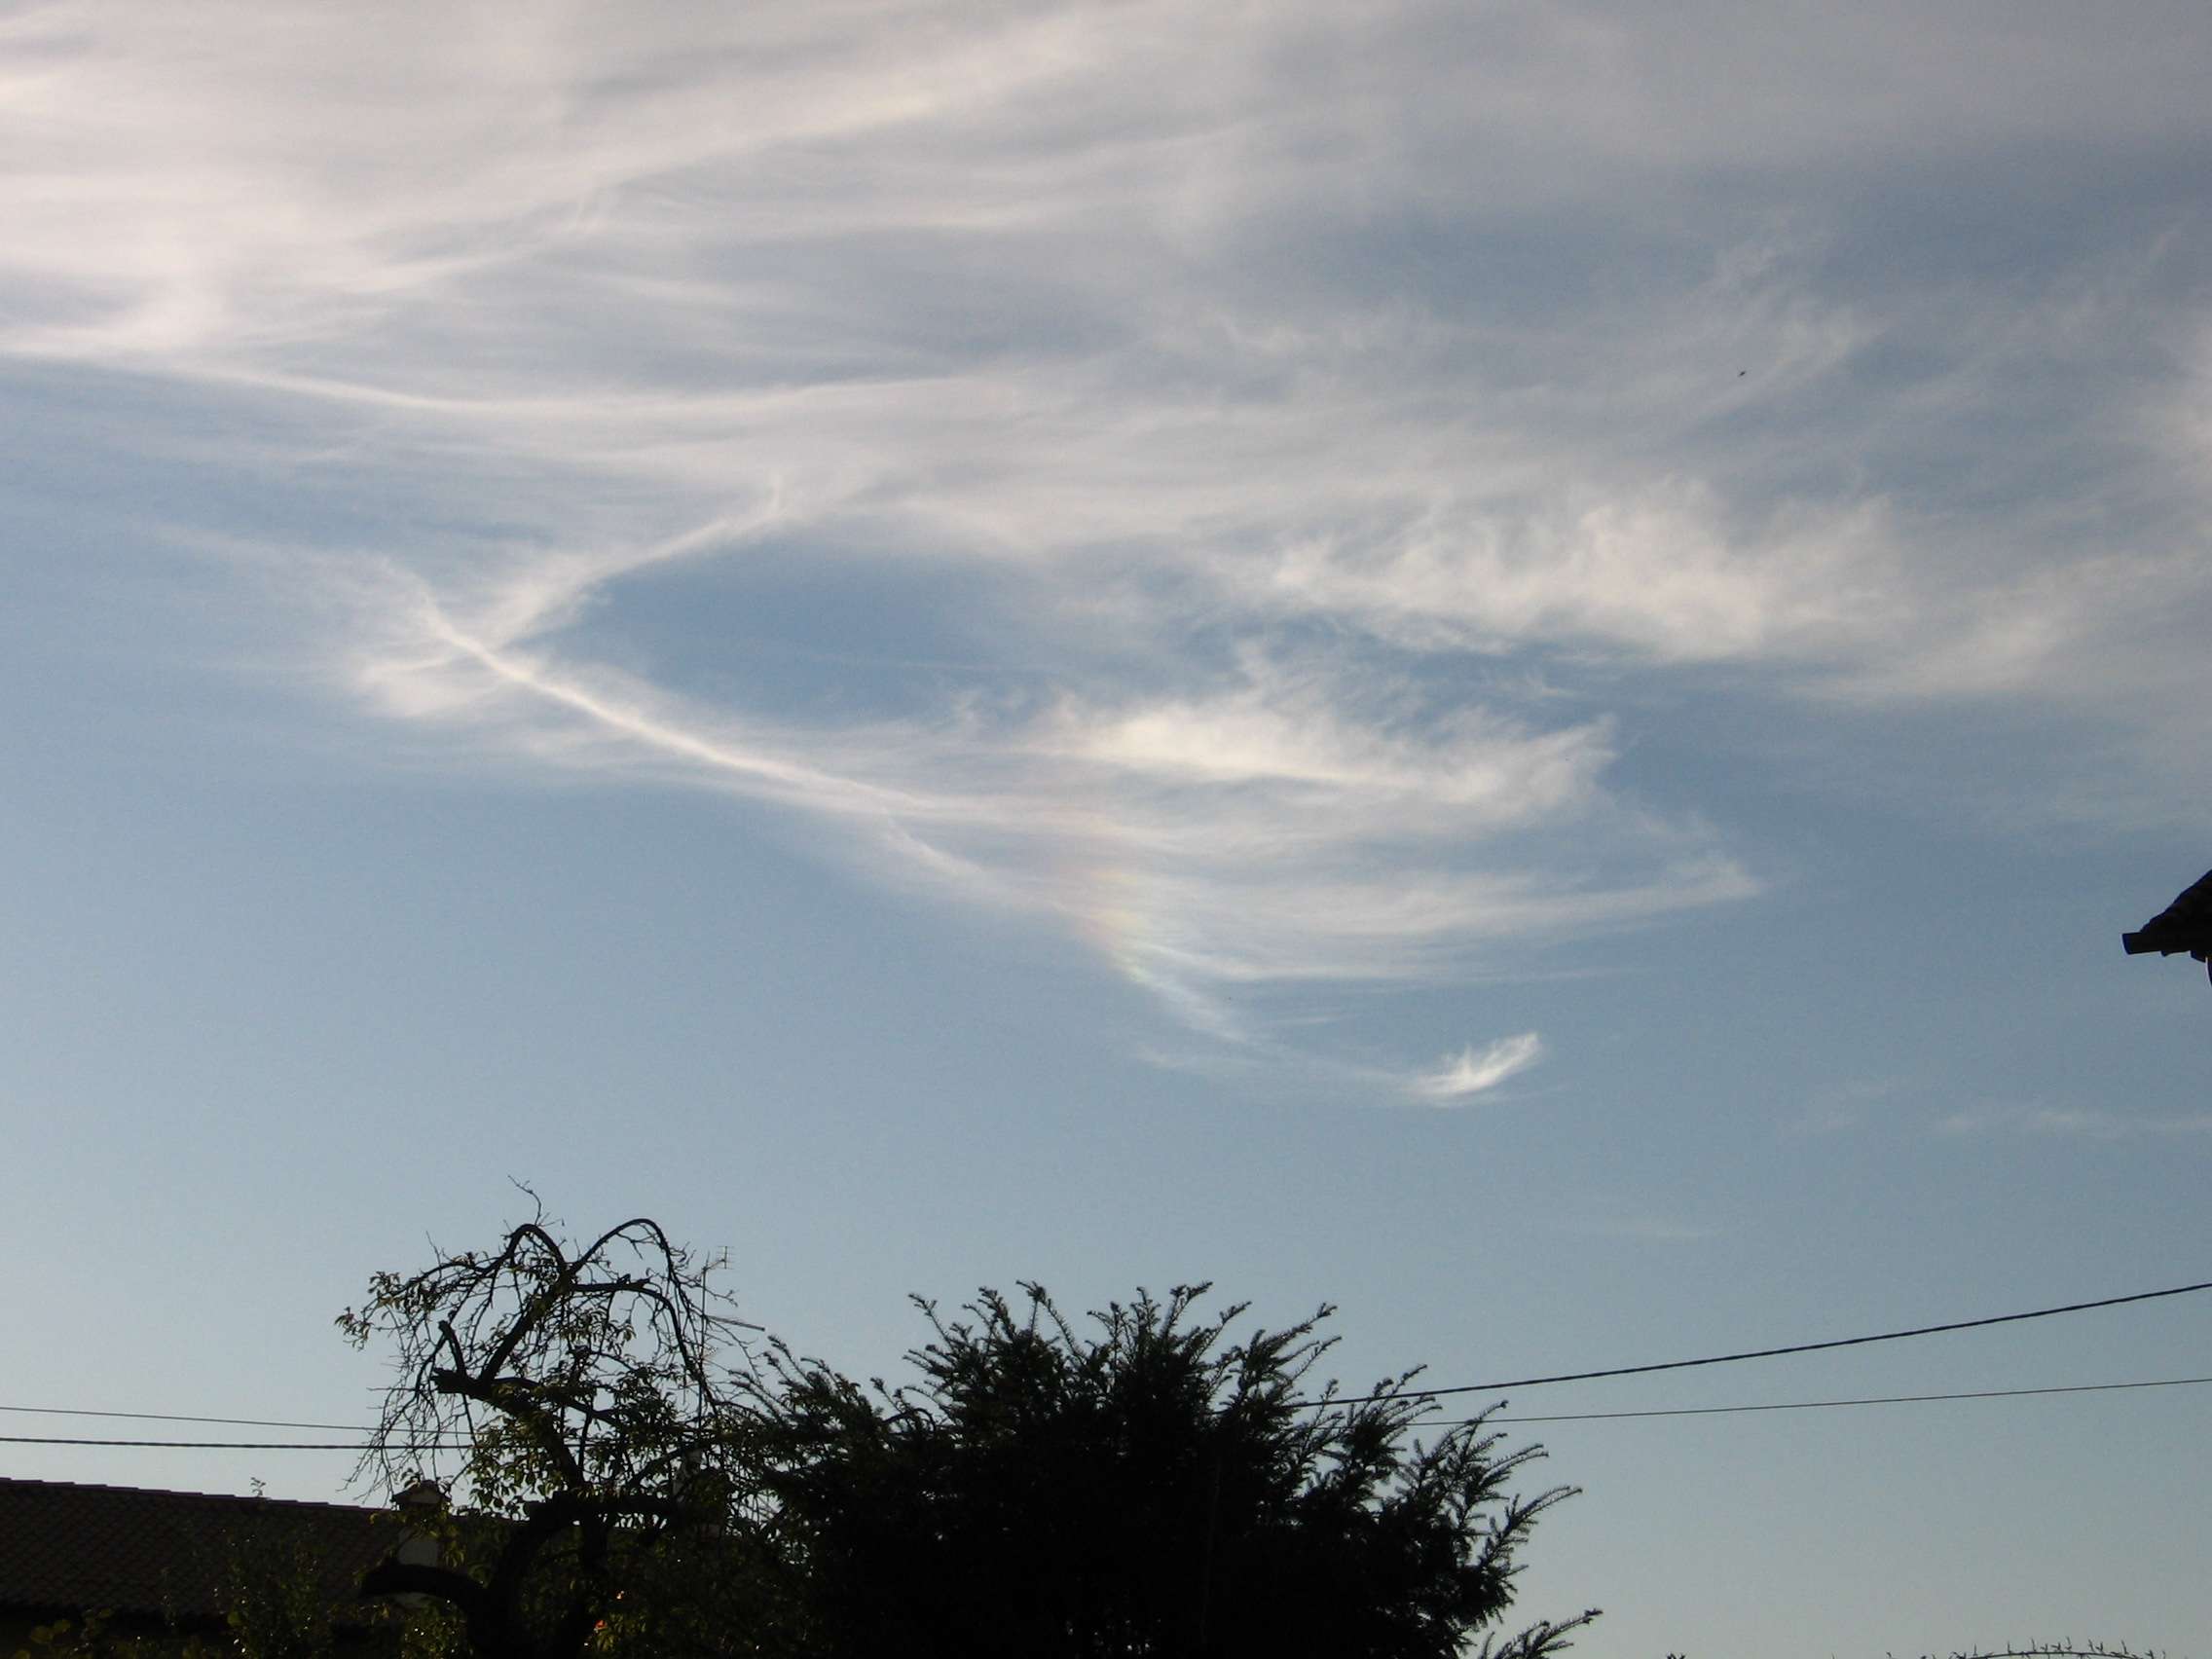 Right sundog: 165 KB; click on the image to enlarge at 2272x1704 pixels